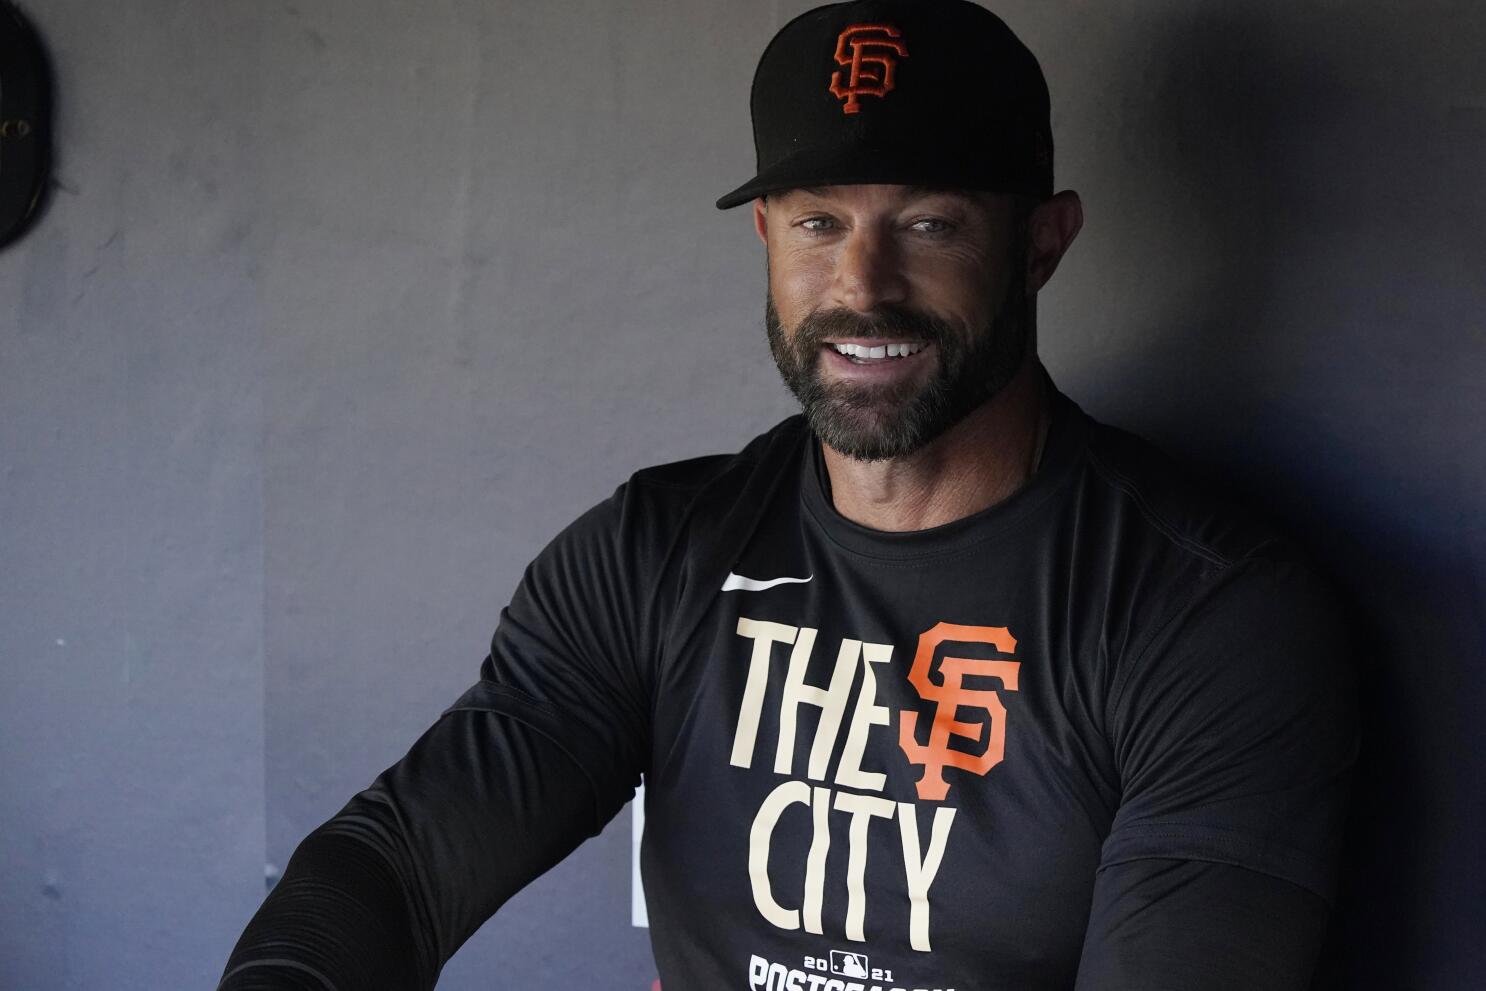 Giants manager Gabe Kapler has put the pieces together for San